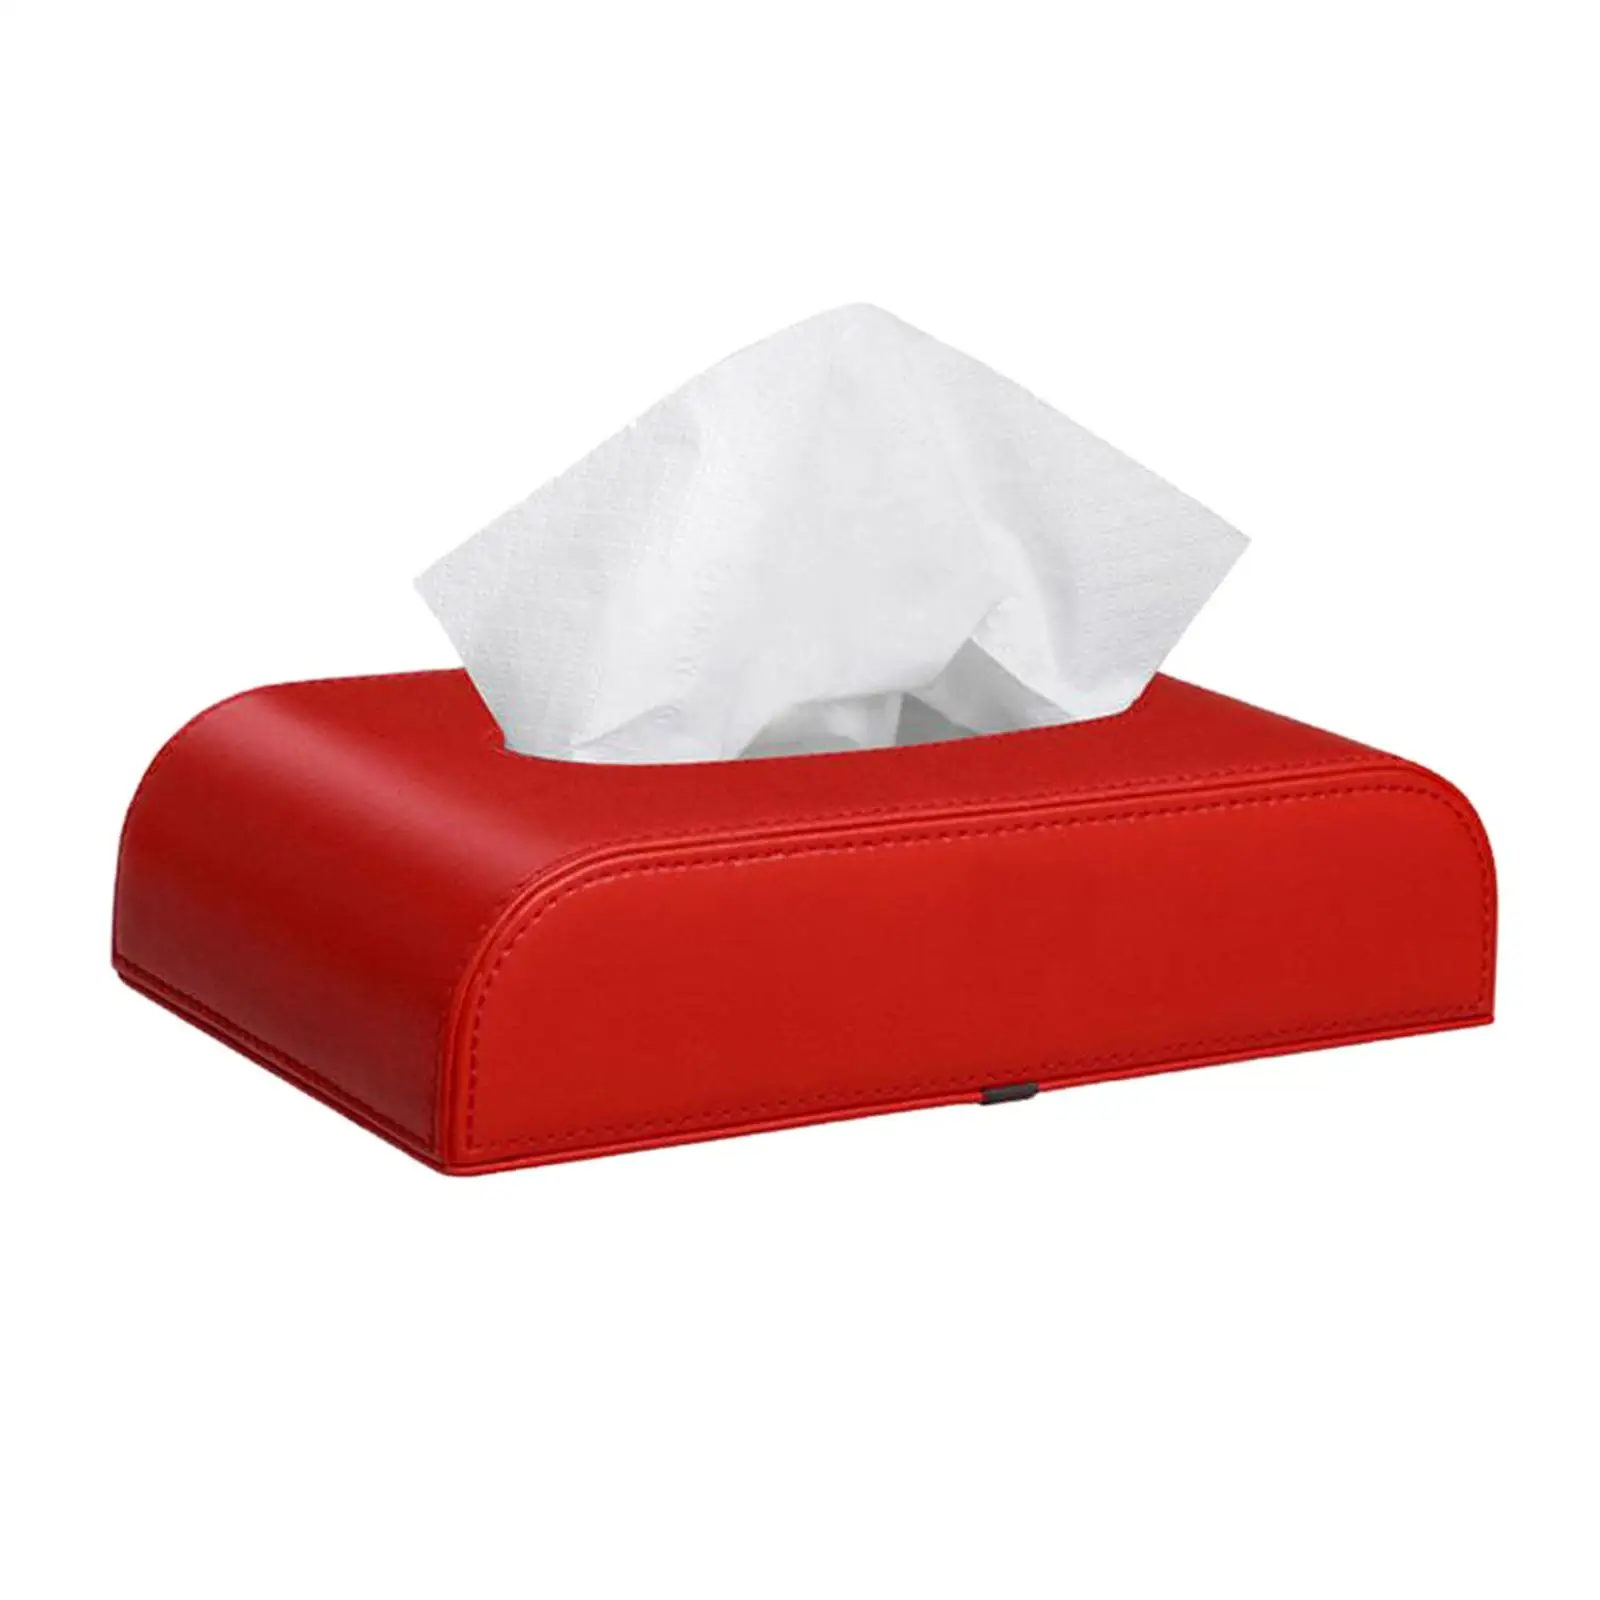 Car Tissue Box PU Leather Tissue Paper Holder Rectangular Box (NO Paper Towel) Replacements Parts